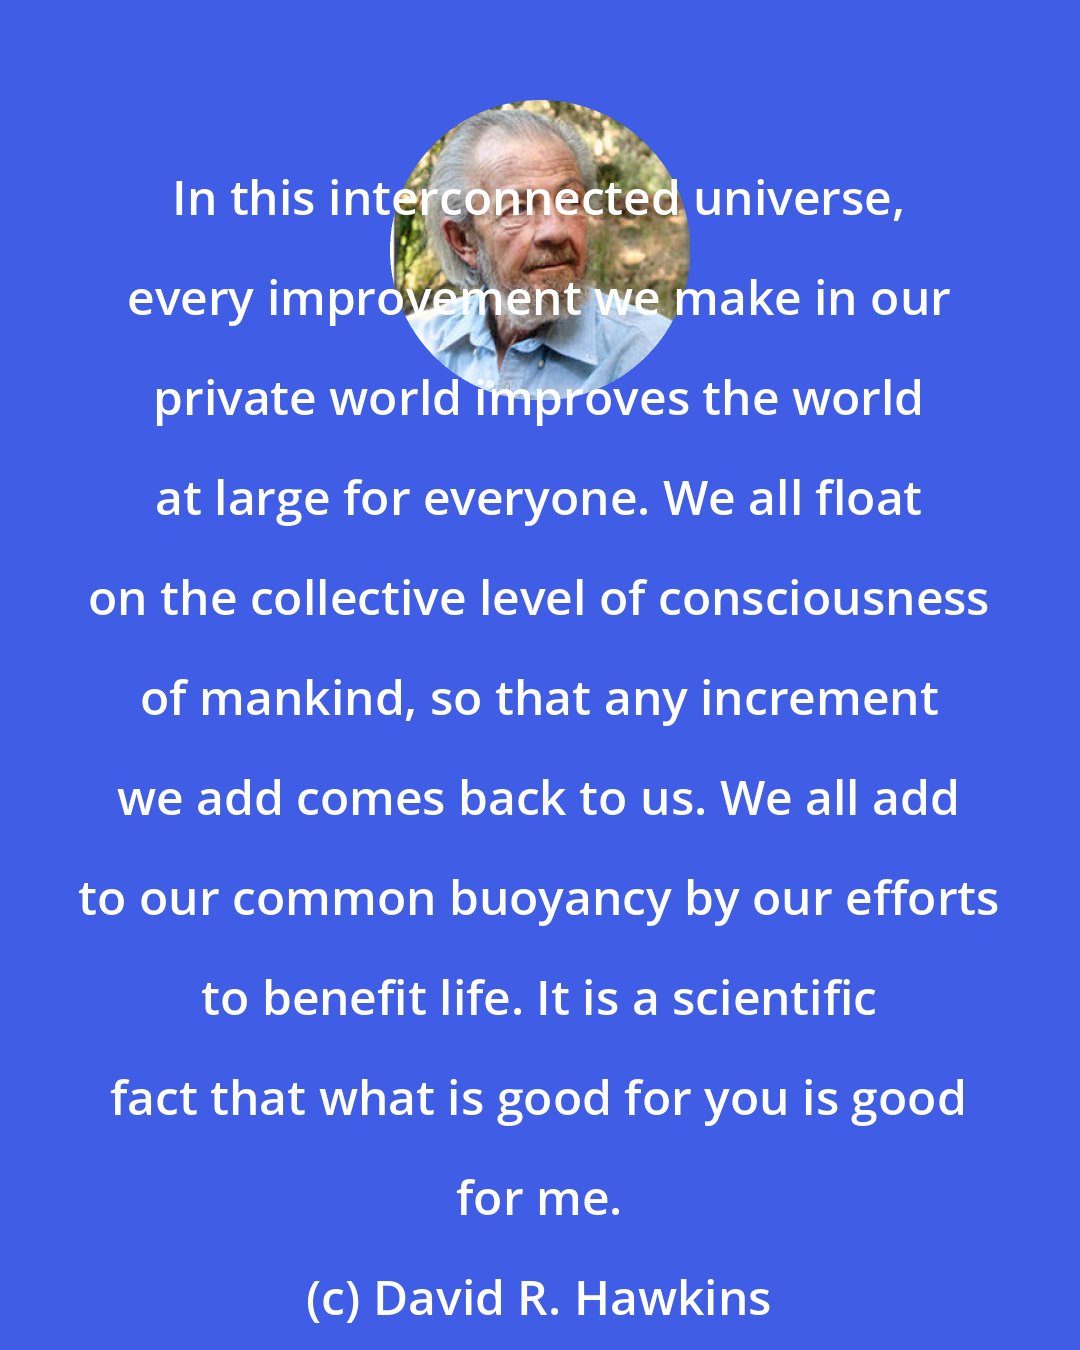 David R. Hawkins: In this interconnected universe, every improvement we make in our private world improves the world at large for everyone. We all float on the collective level of consciousness of mankind, so that any increment we add comes back to us. We all add to our common buoyancy by our efforts to benefit life. It is a scientific fact that what is good for you is good for me.